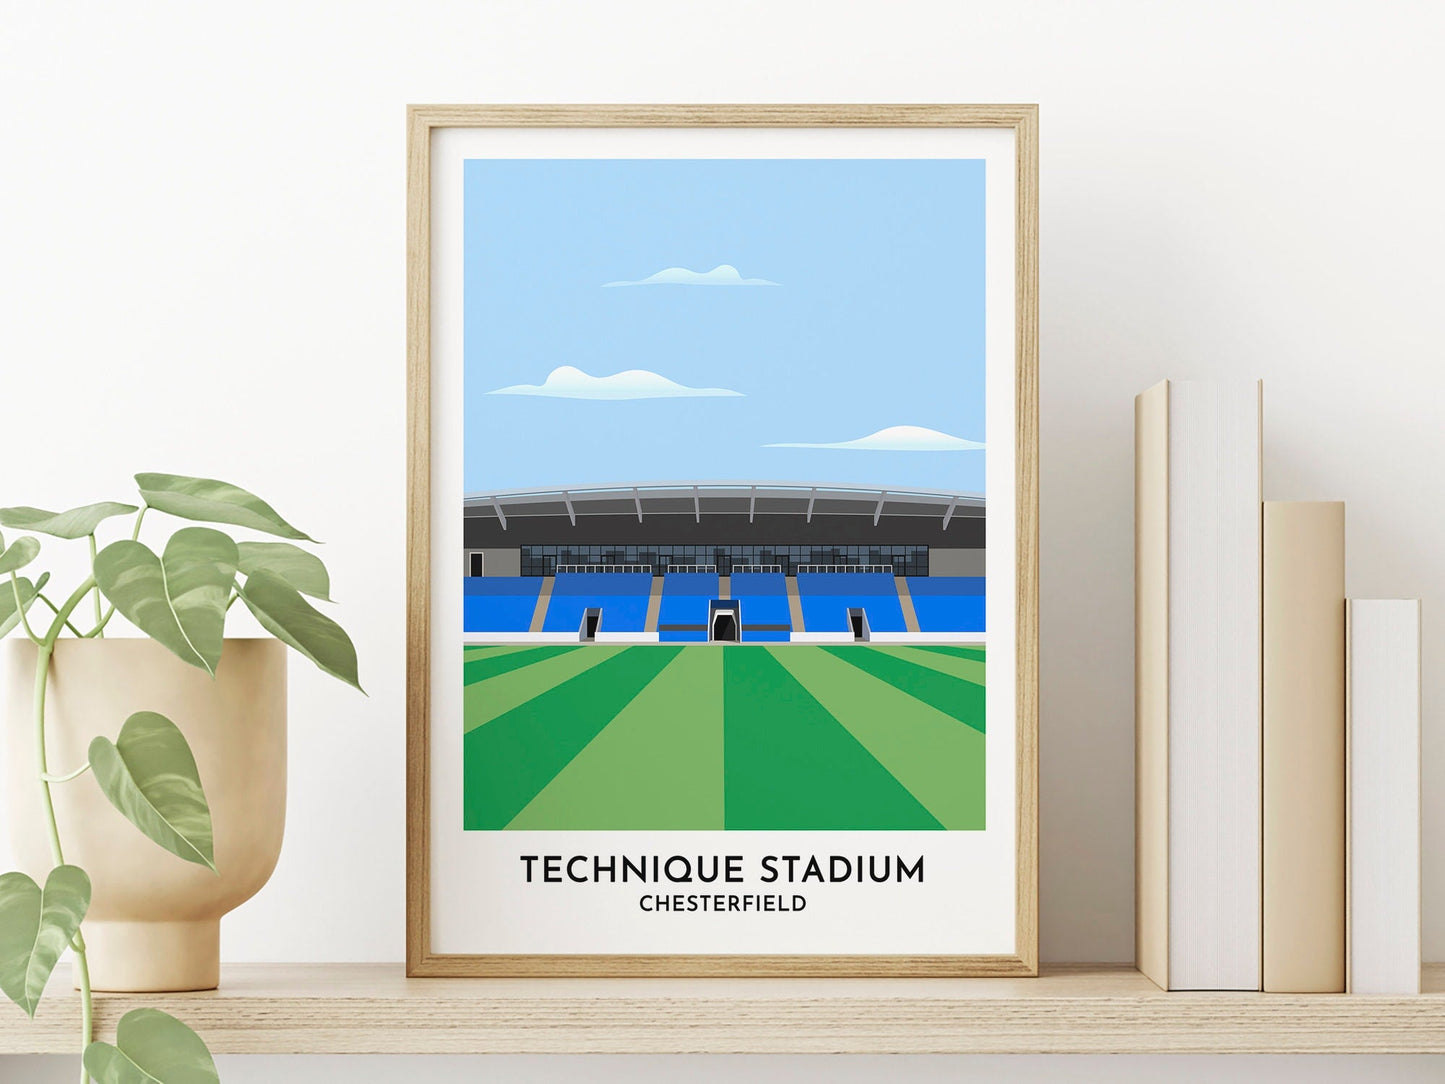 Chesterfield Football - Technique Stadium Graphic Illustrated Print - Gift for Grandad - 21st Birthday Gift - Gifts for Him - Turf Football Art